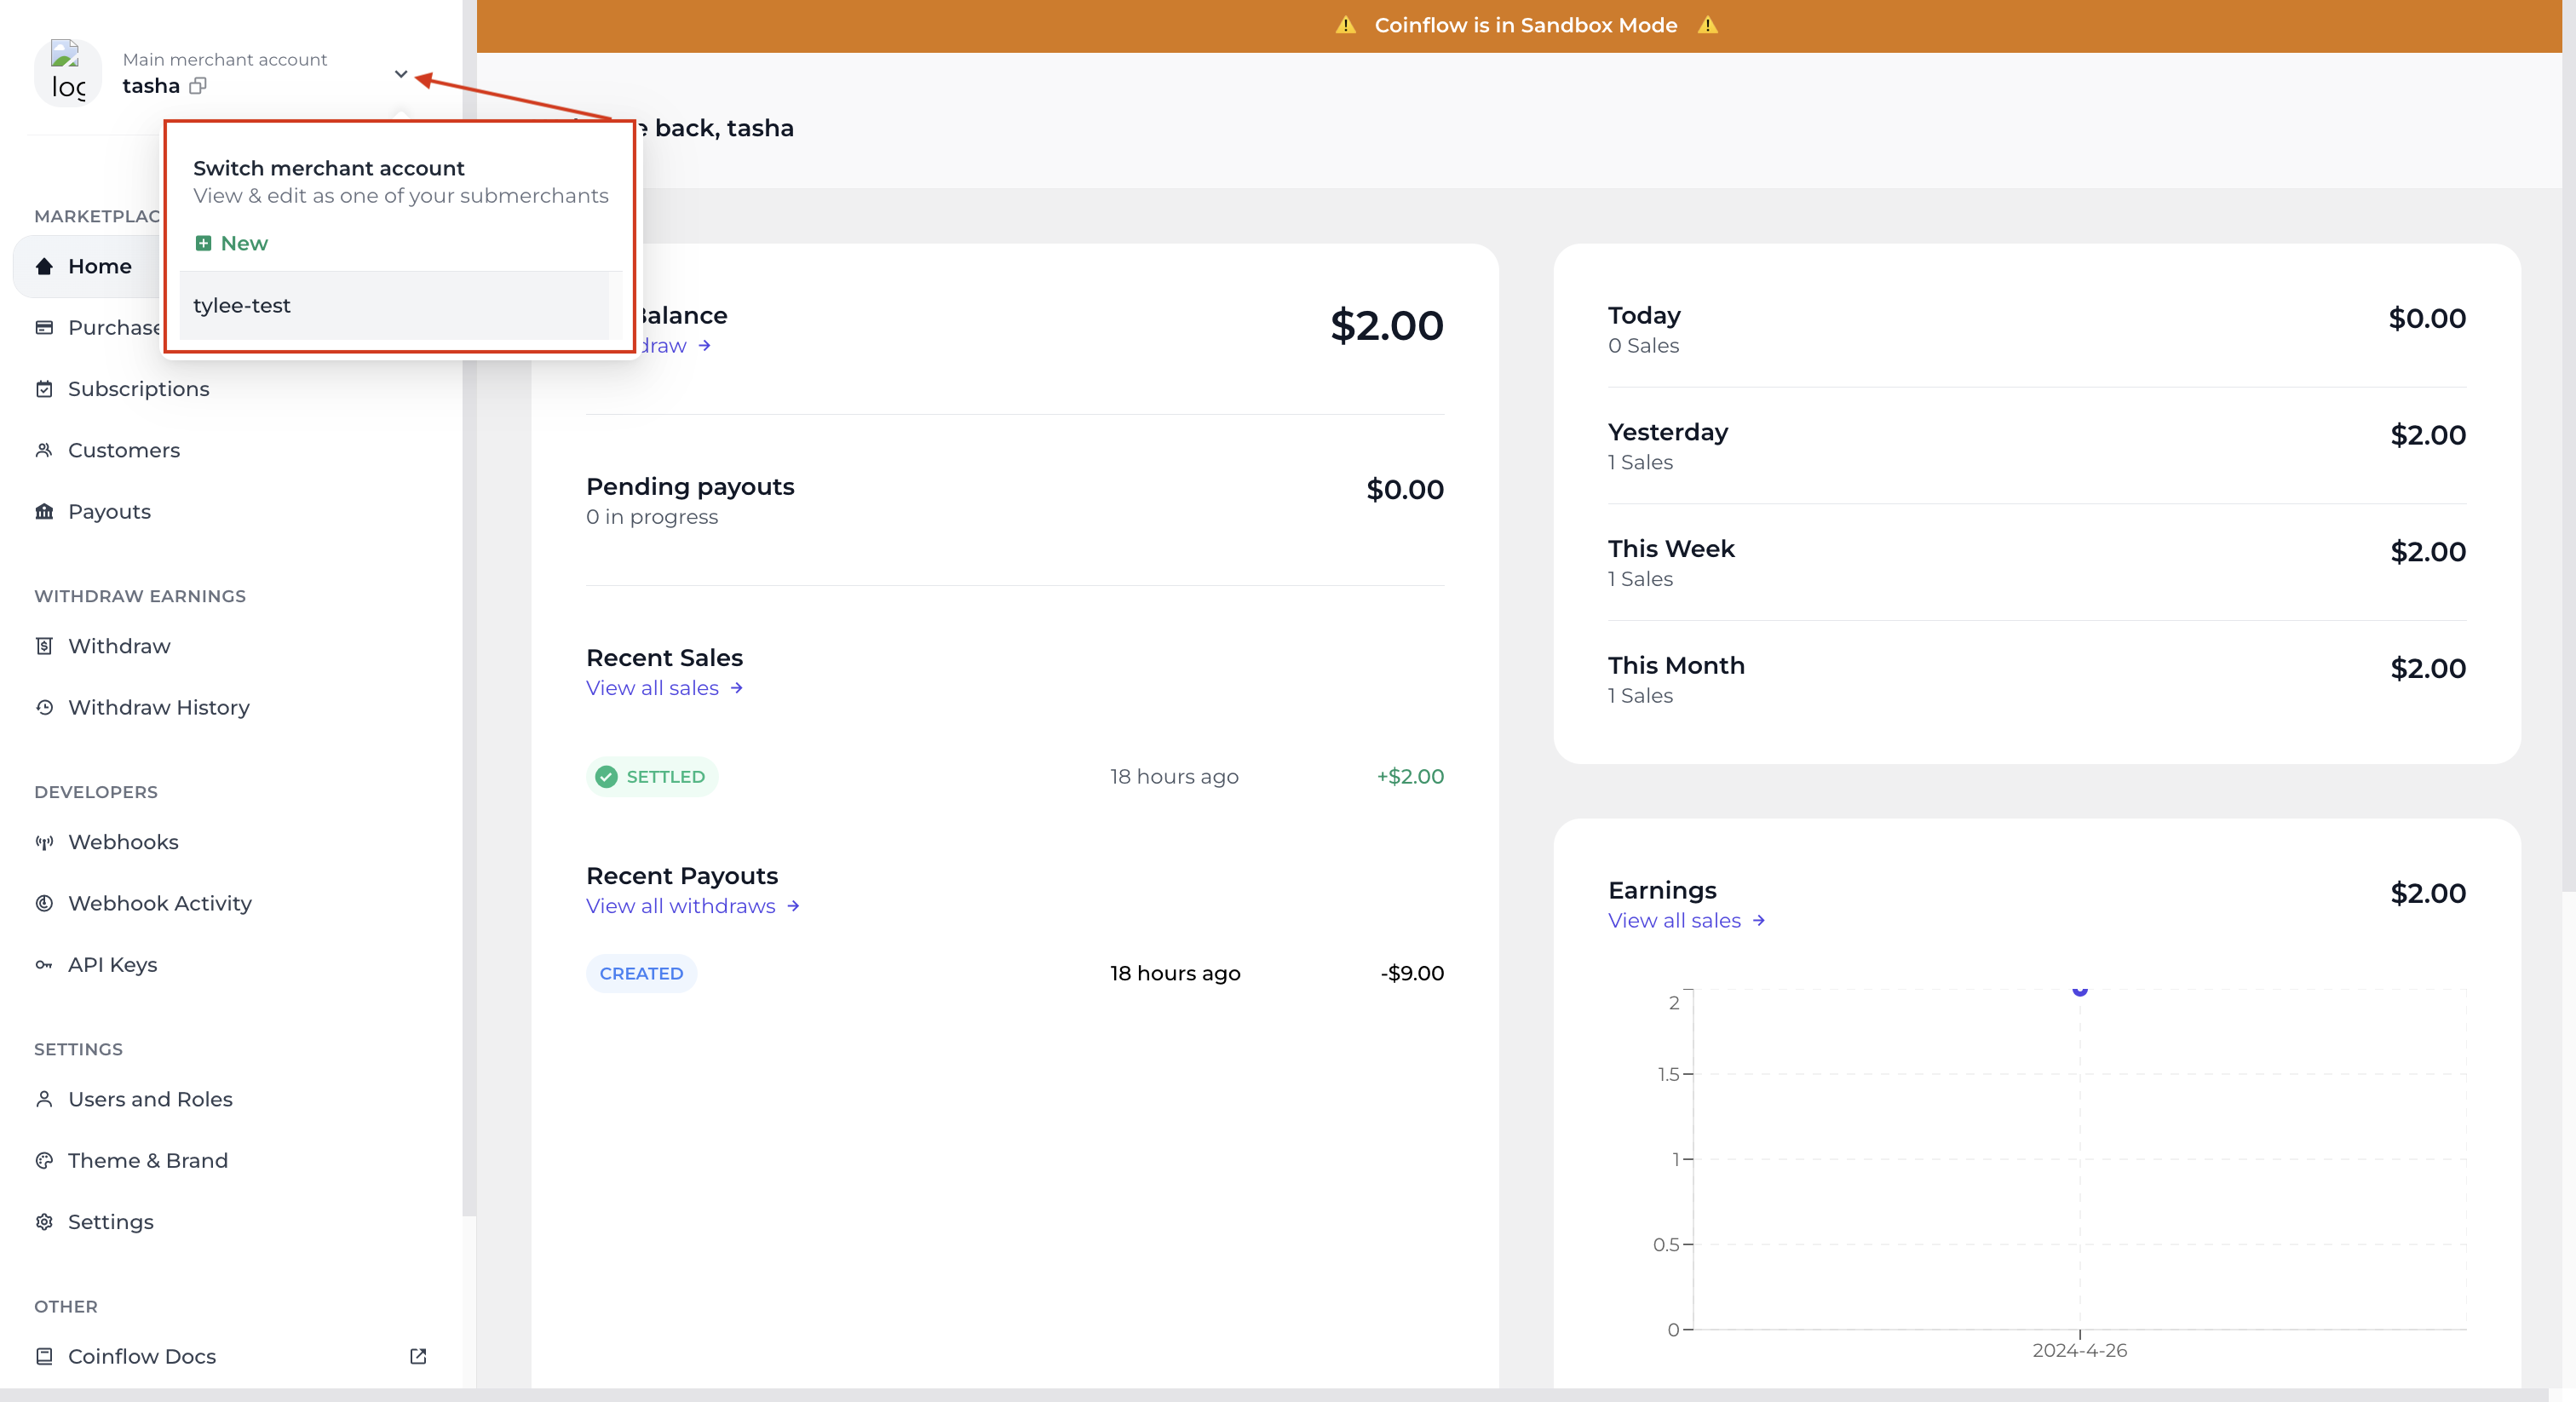 How to view / manage submerchant accounts on marketplace owner's dashboard